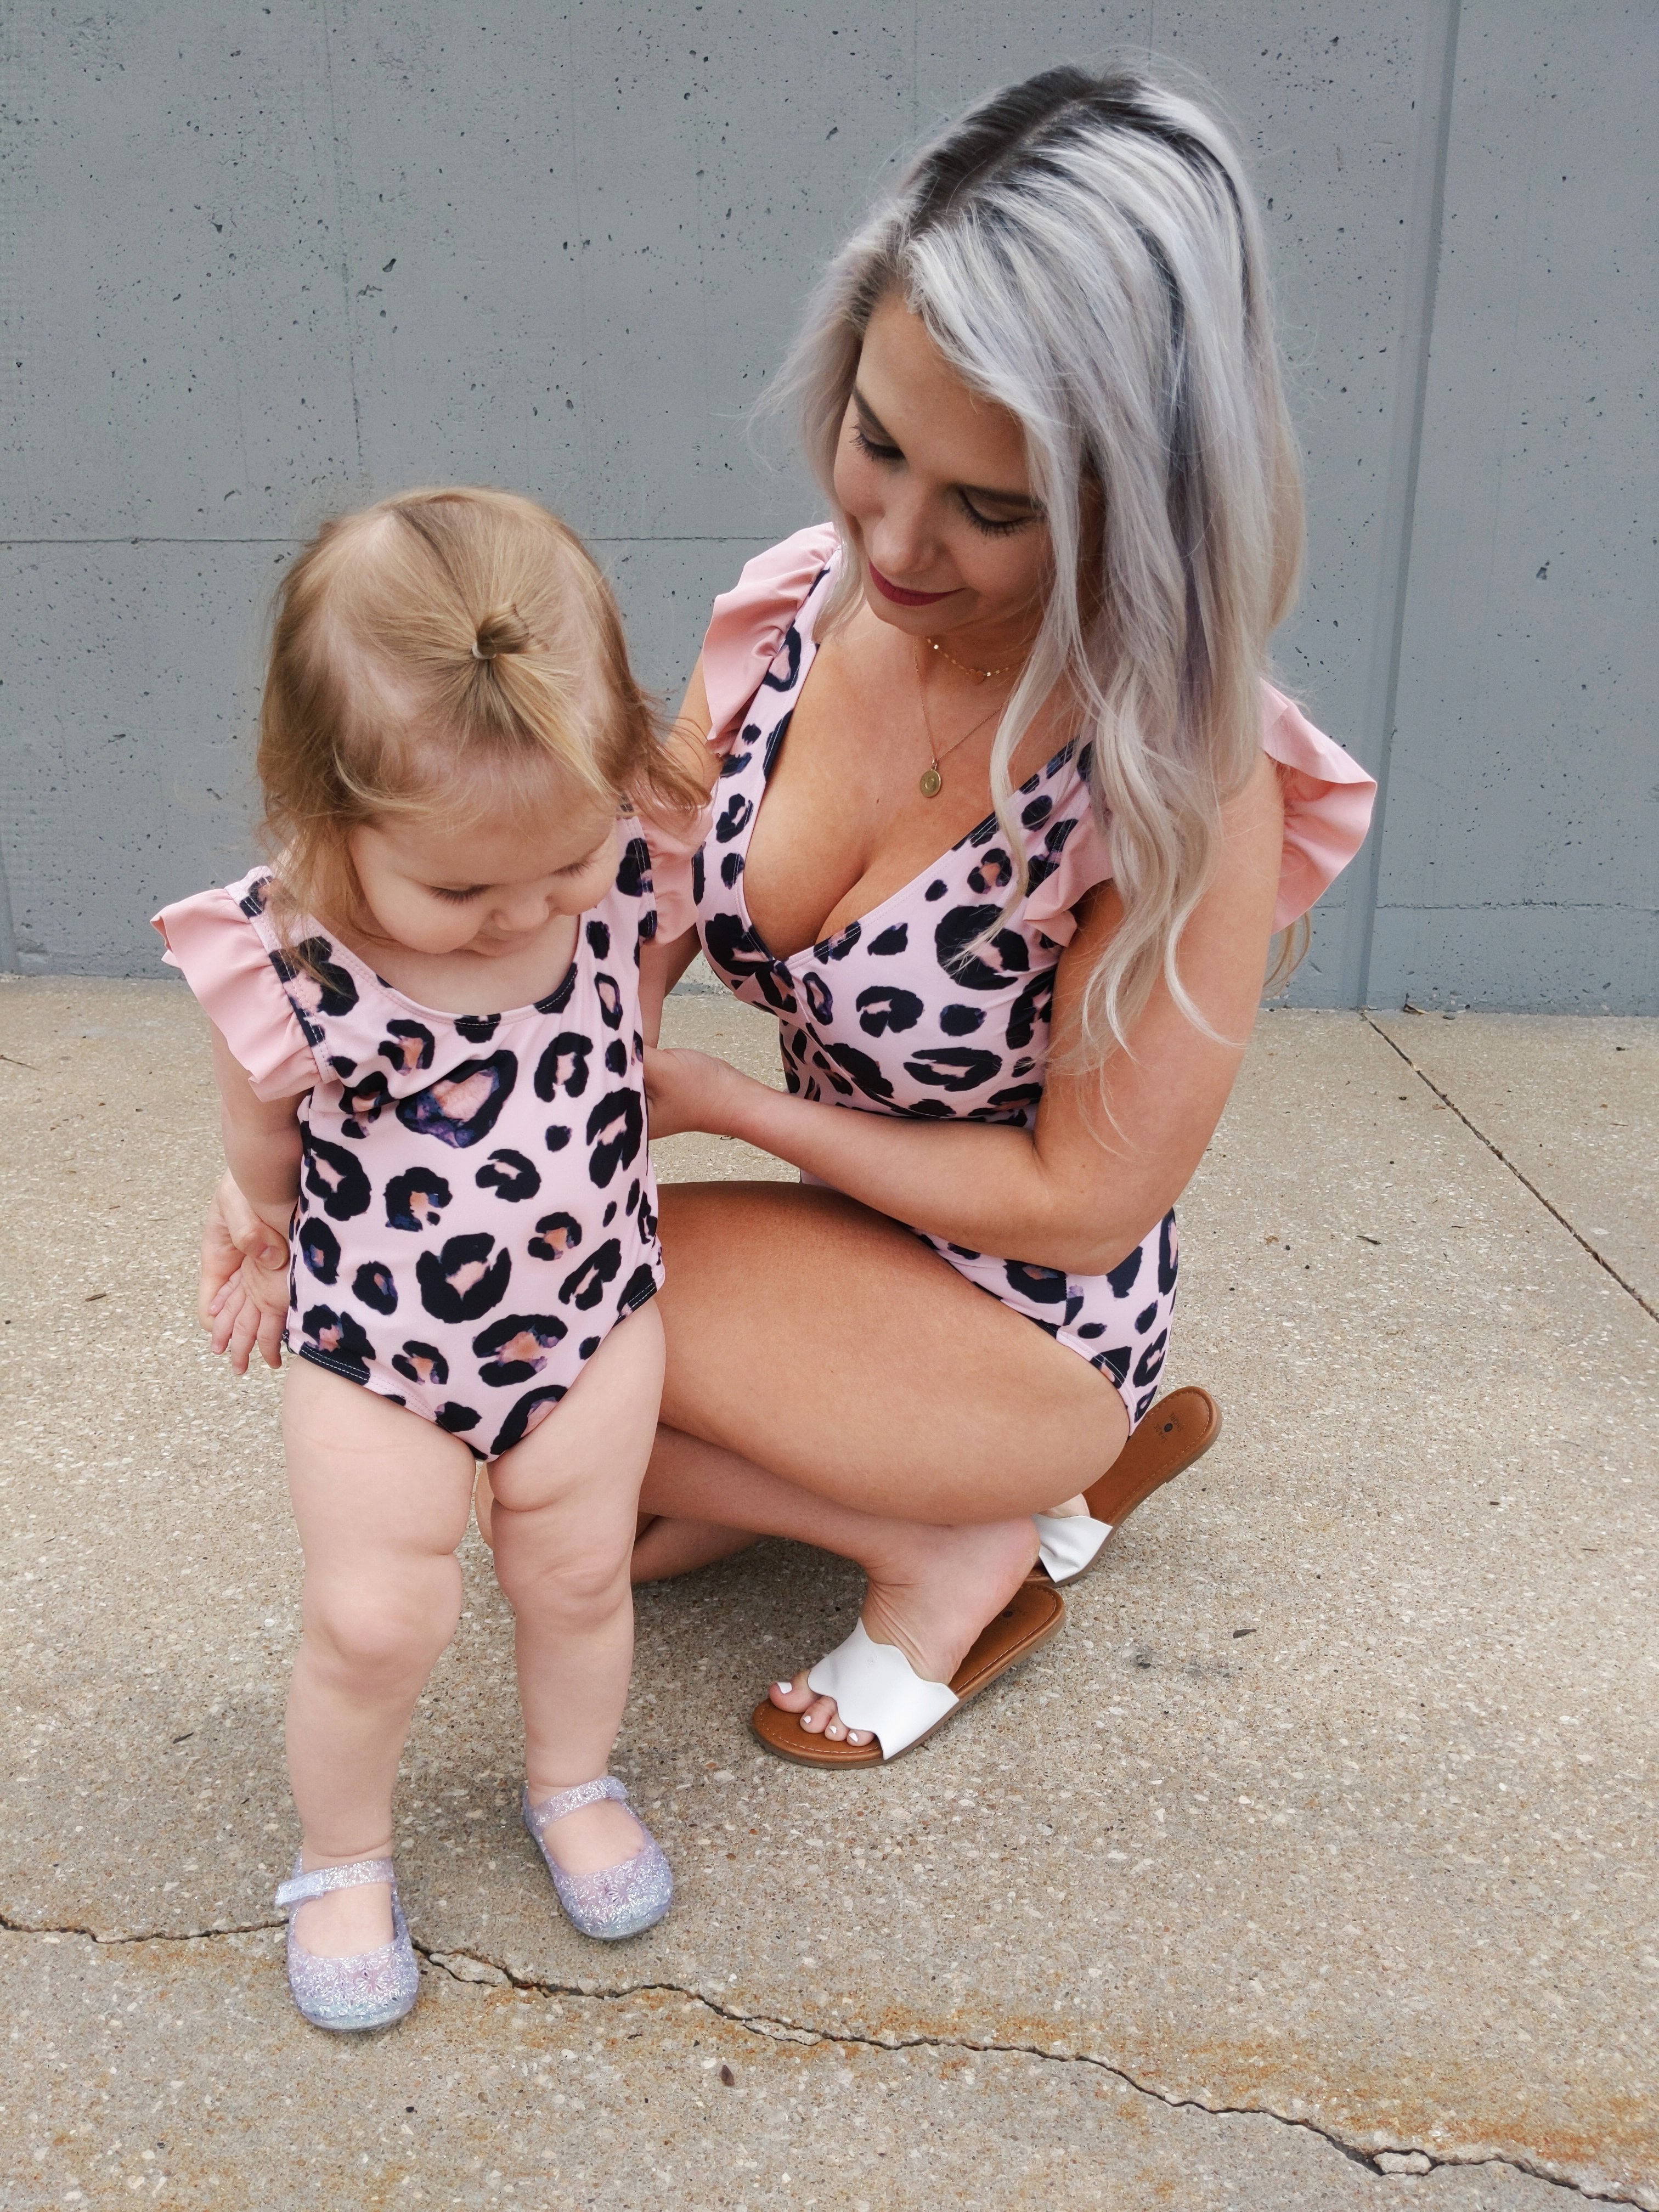 Mommy and Me Swimsuits Baby Girl: The cutest mommy and me swimsuits for baby girls! Featuring mommy and me one piece swimsuits and mommy and me bikini swimsuits so you'll find the best mommy and me swimwear for you and your mini me! Fashion blogger Tricia Nibarger of COVET by tricia showcases mommy and me swimsuits with her daughter. #mommyandme #girlmom #swimsuits